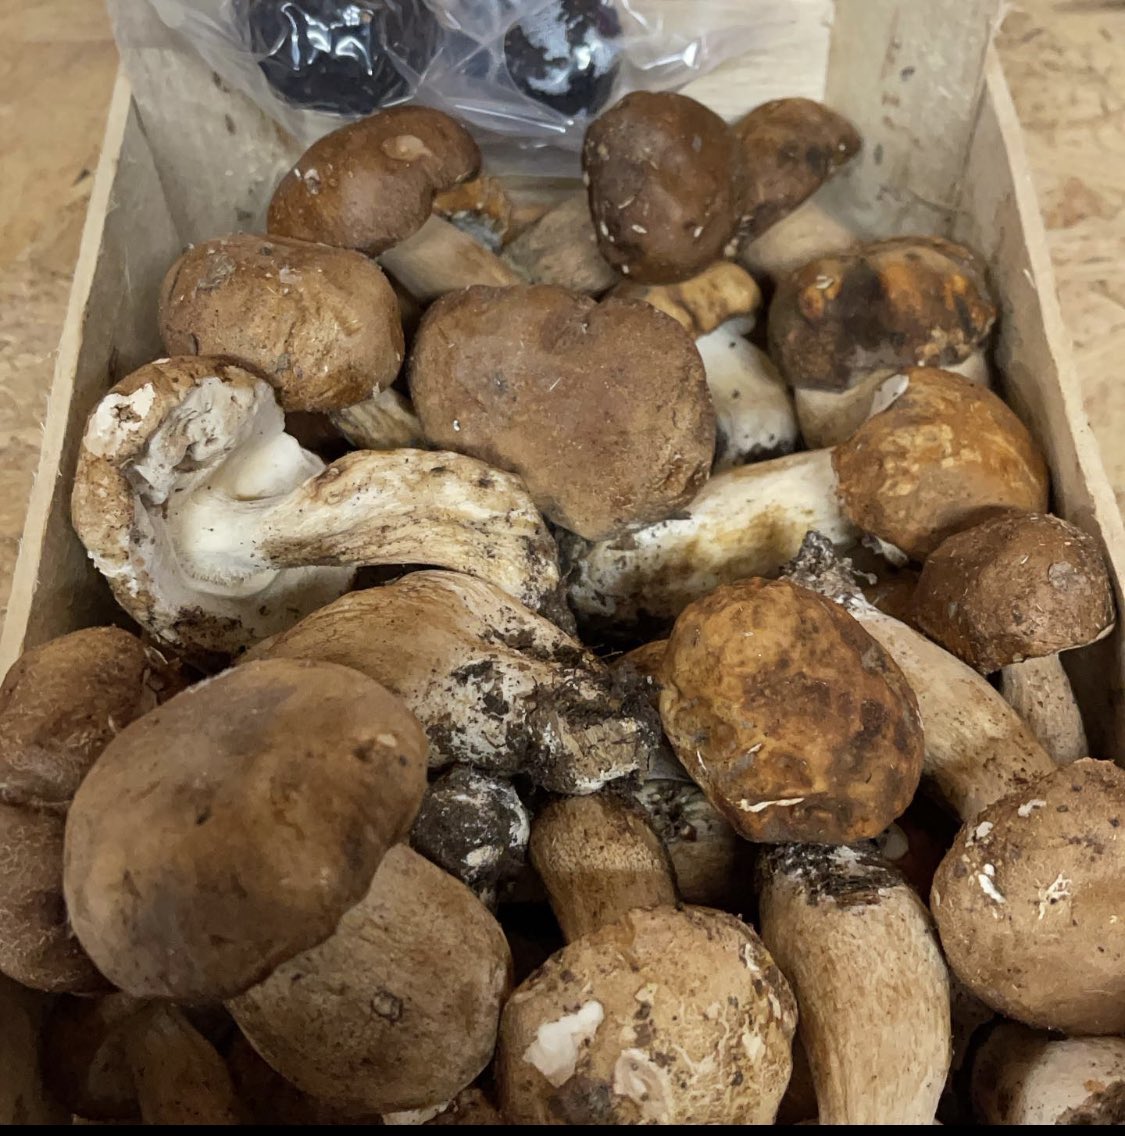 Cepes for the weekend?

#Cepes
#WildMushrooms
#ExoticMushrooms
#Hoole
#Chester
@shitchester